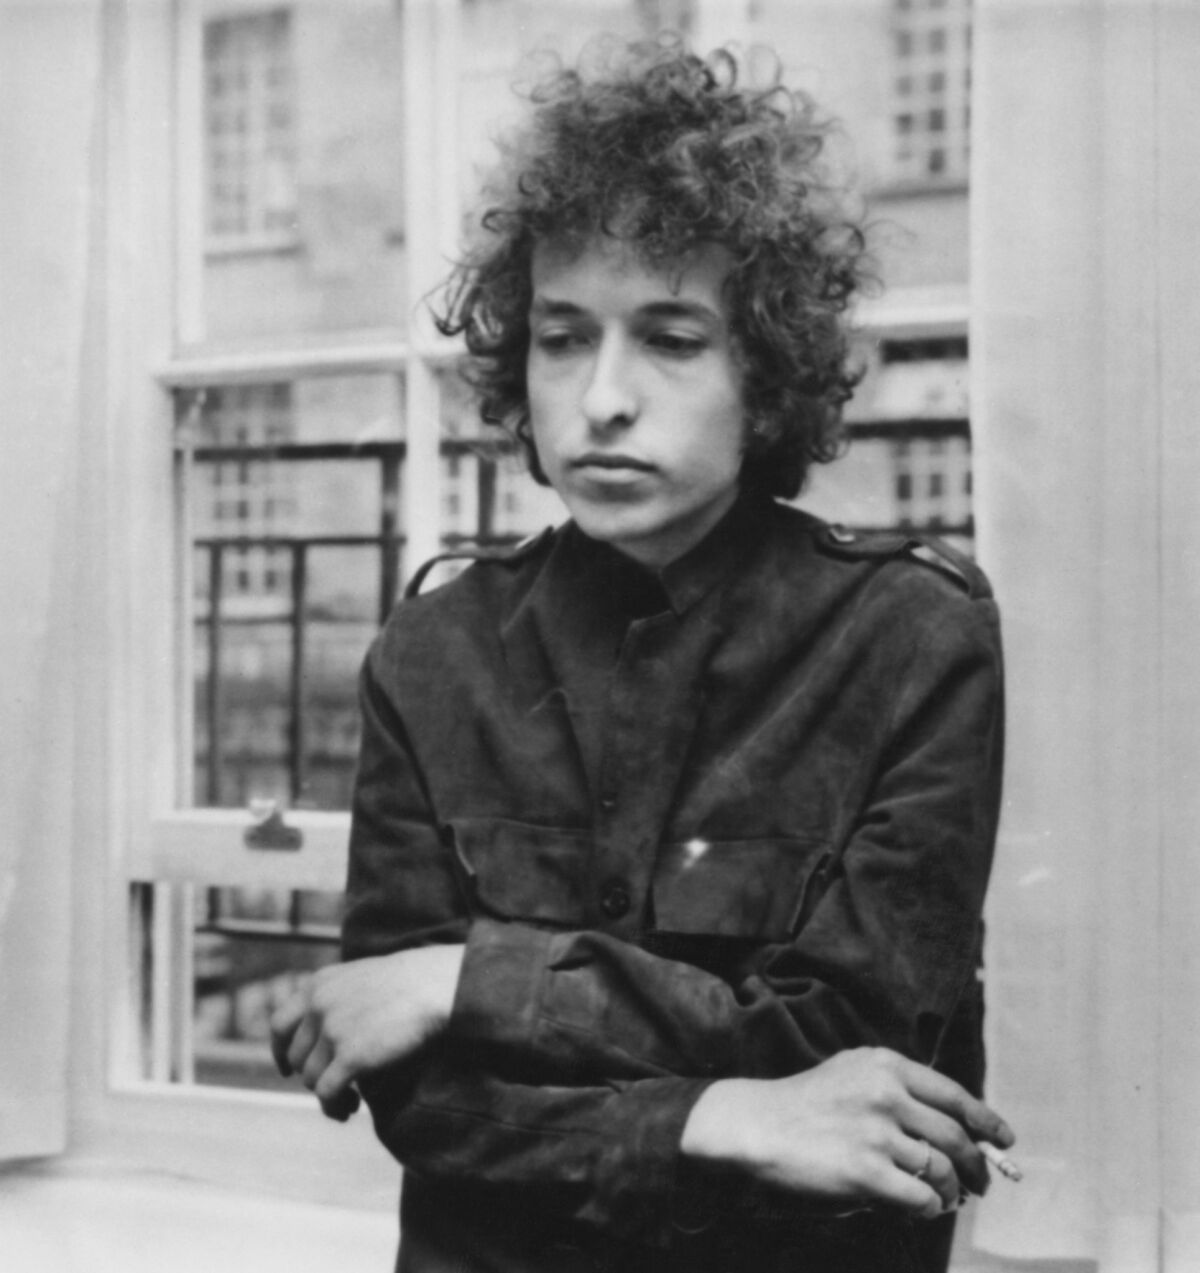 No list of music to smoke dope to is complete without Bob Dylan.